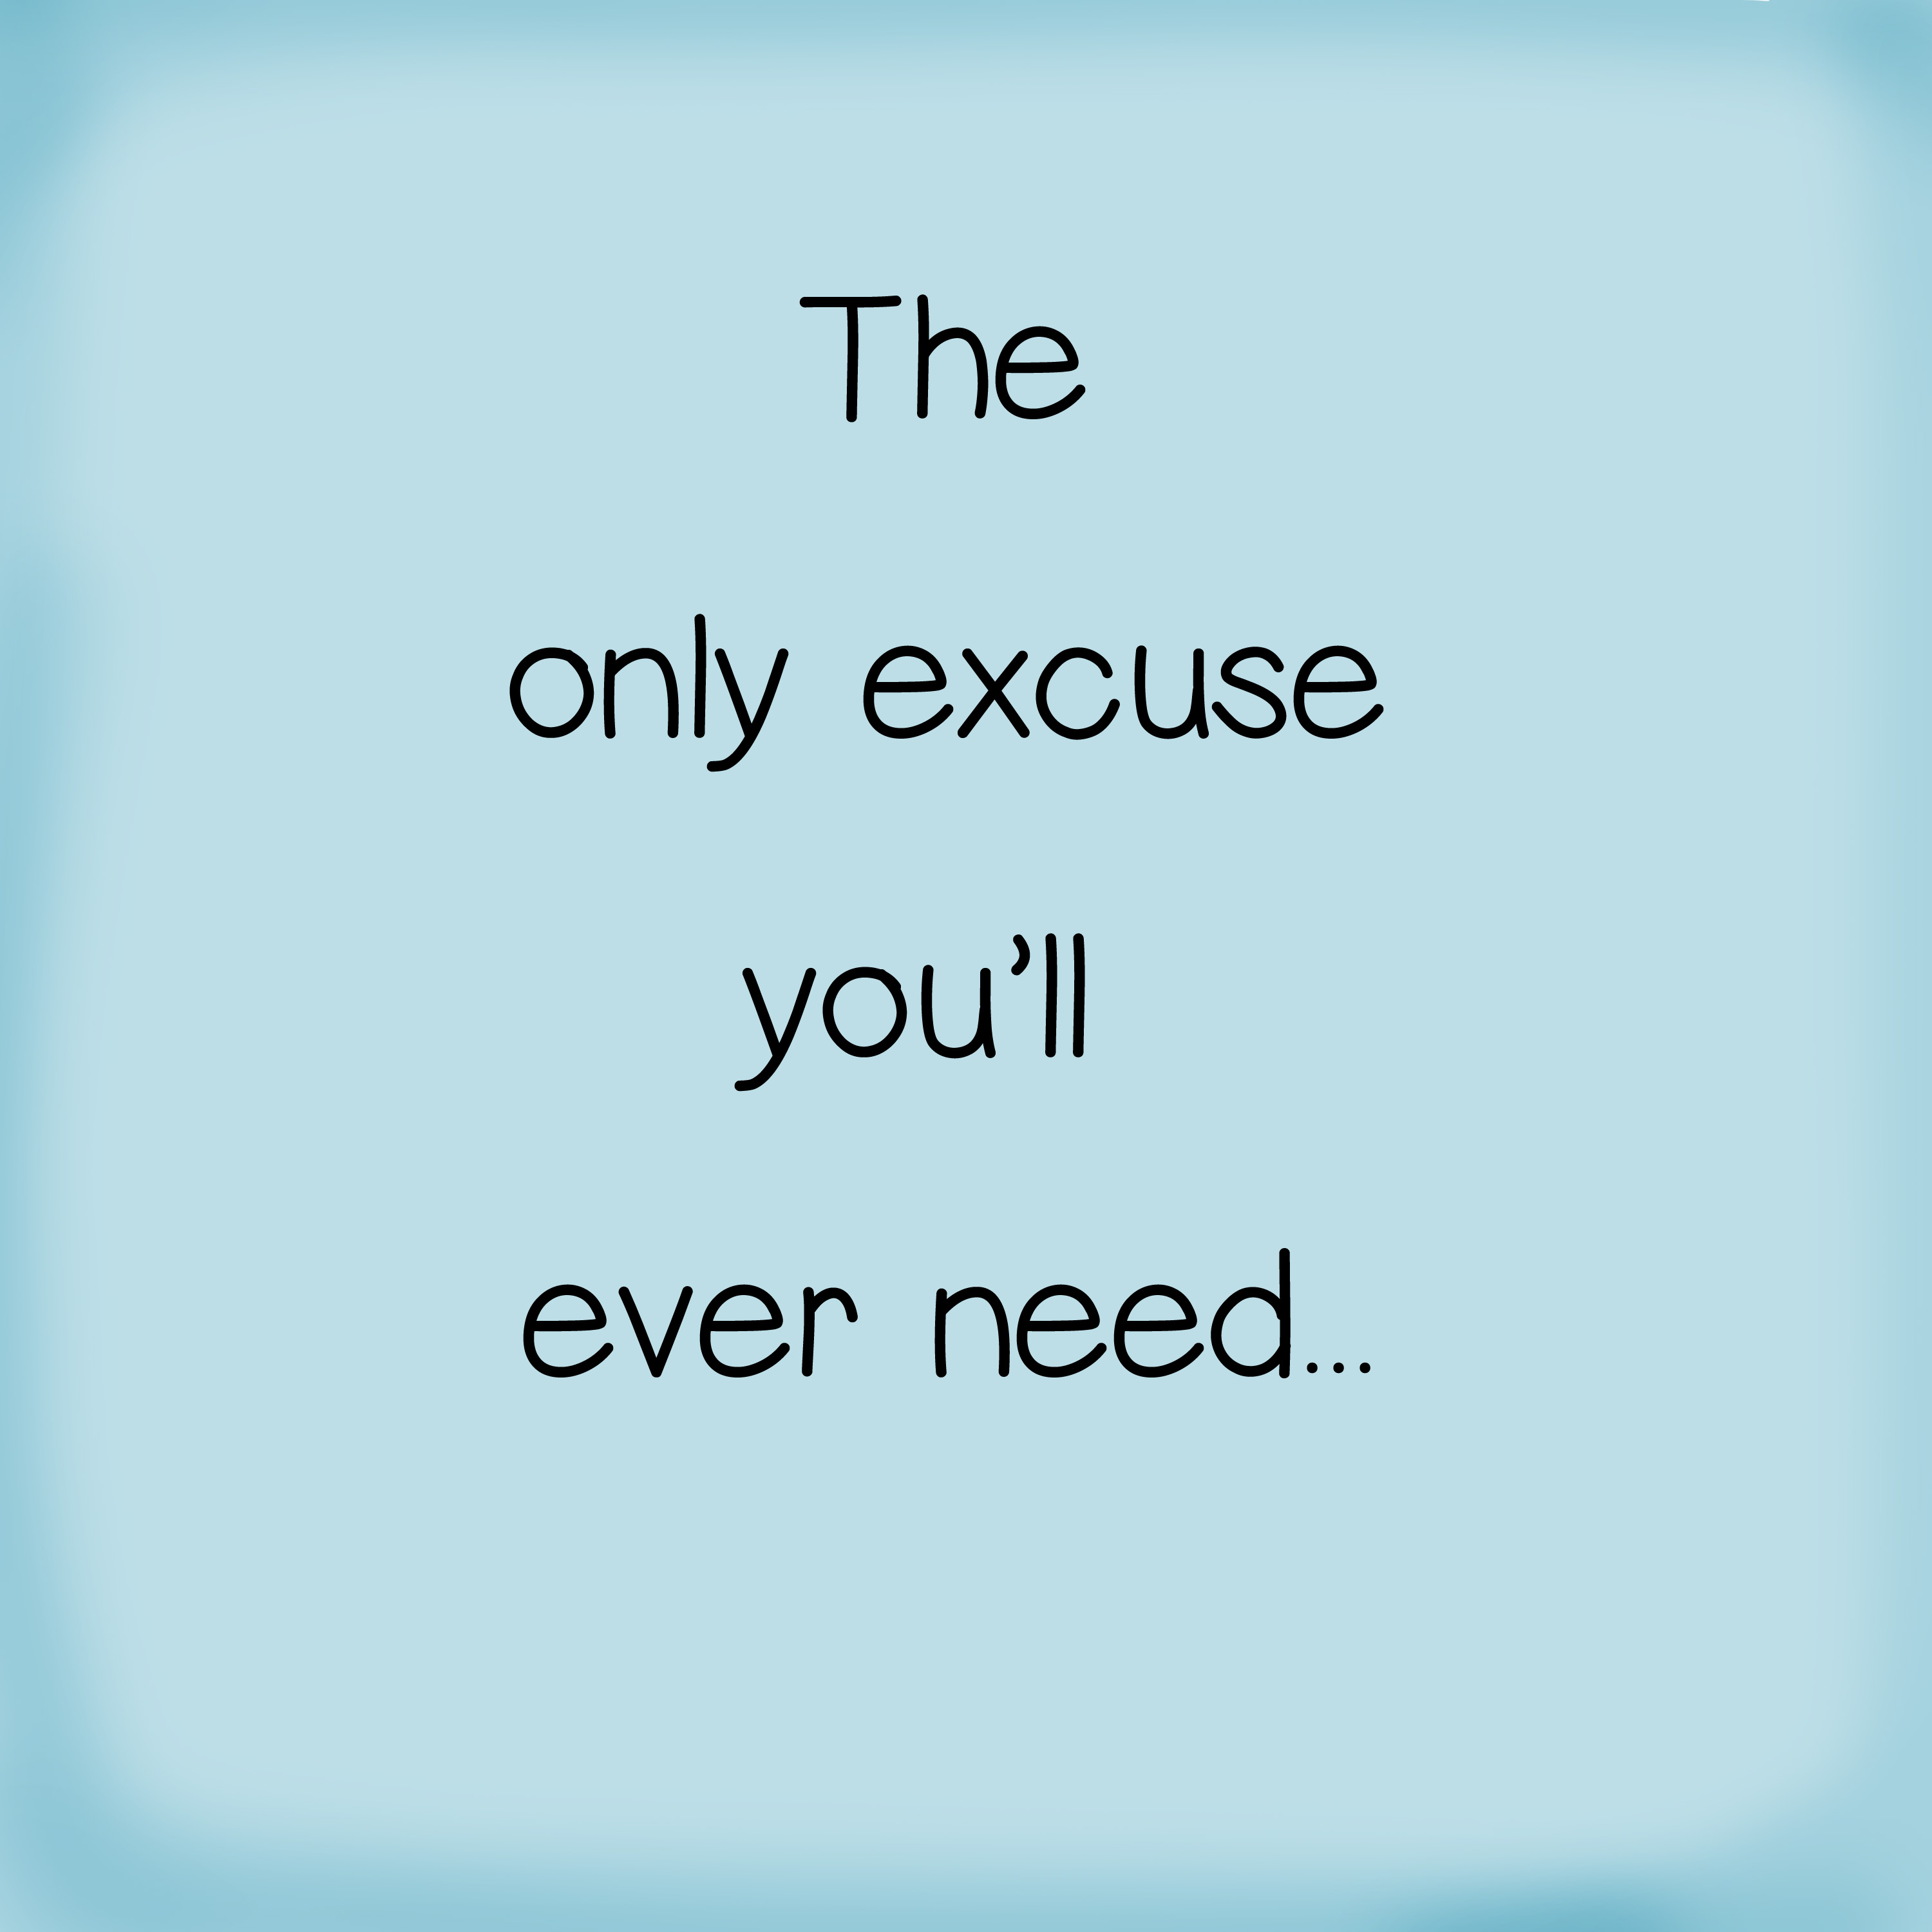 The only excuse you'll ever need ...